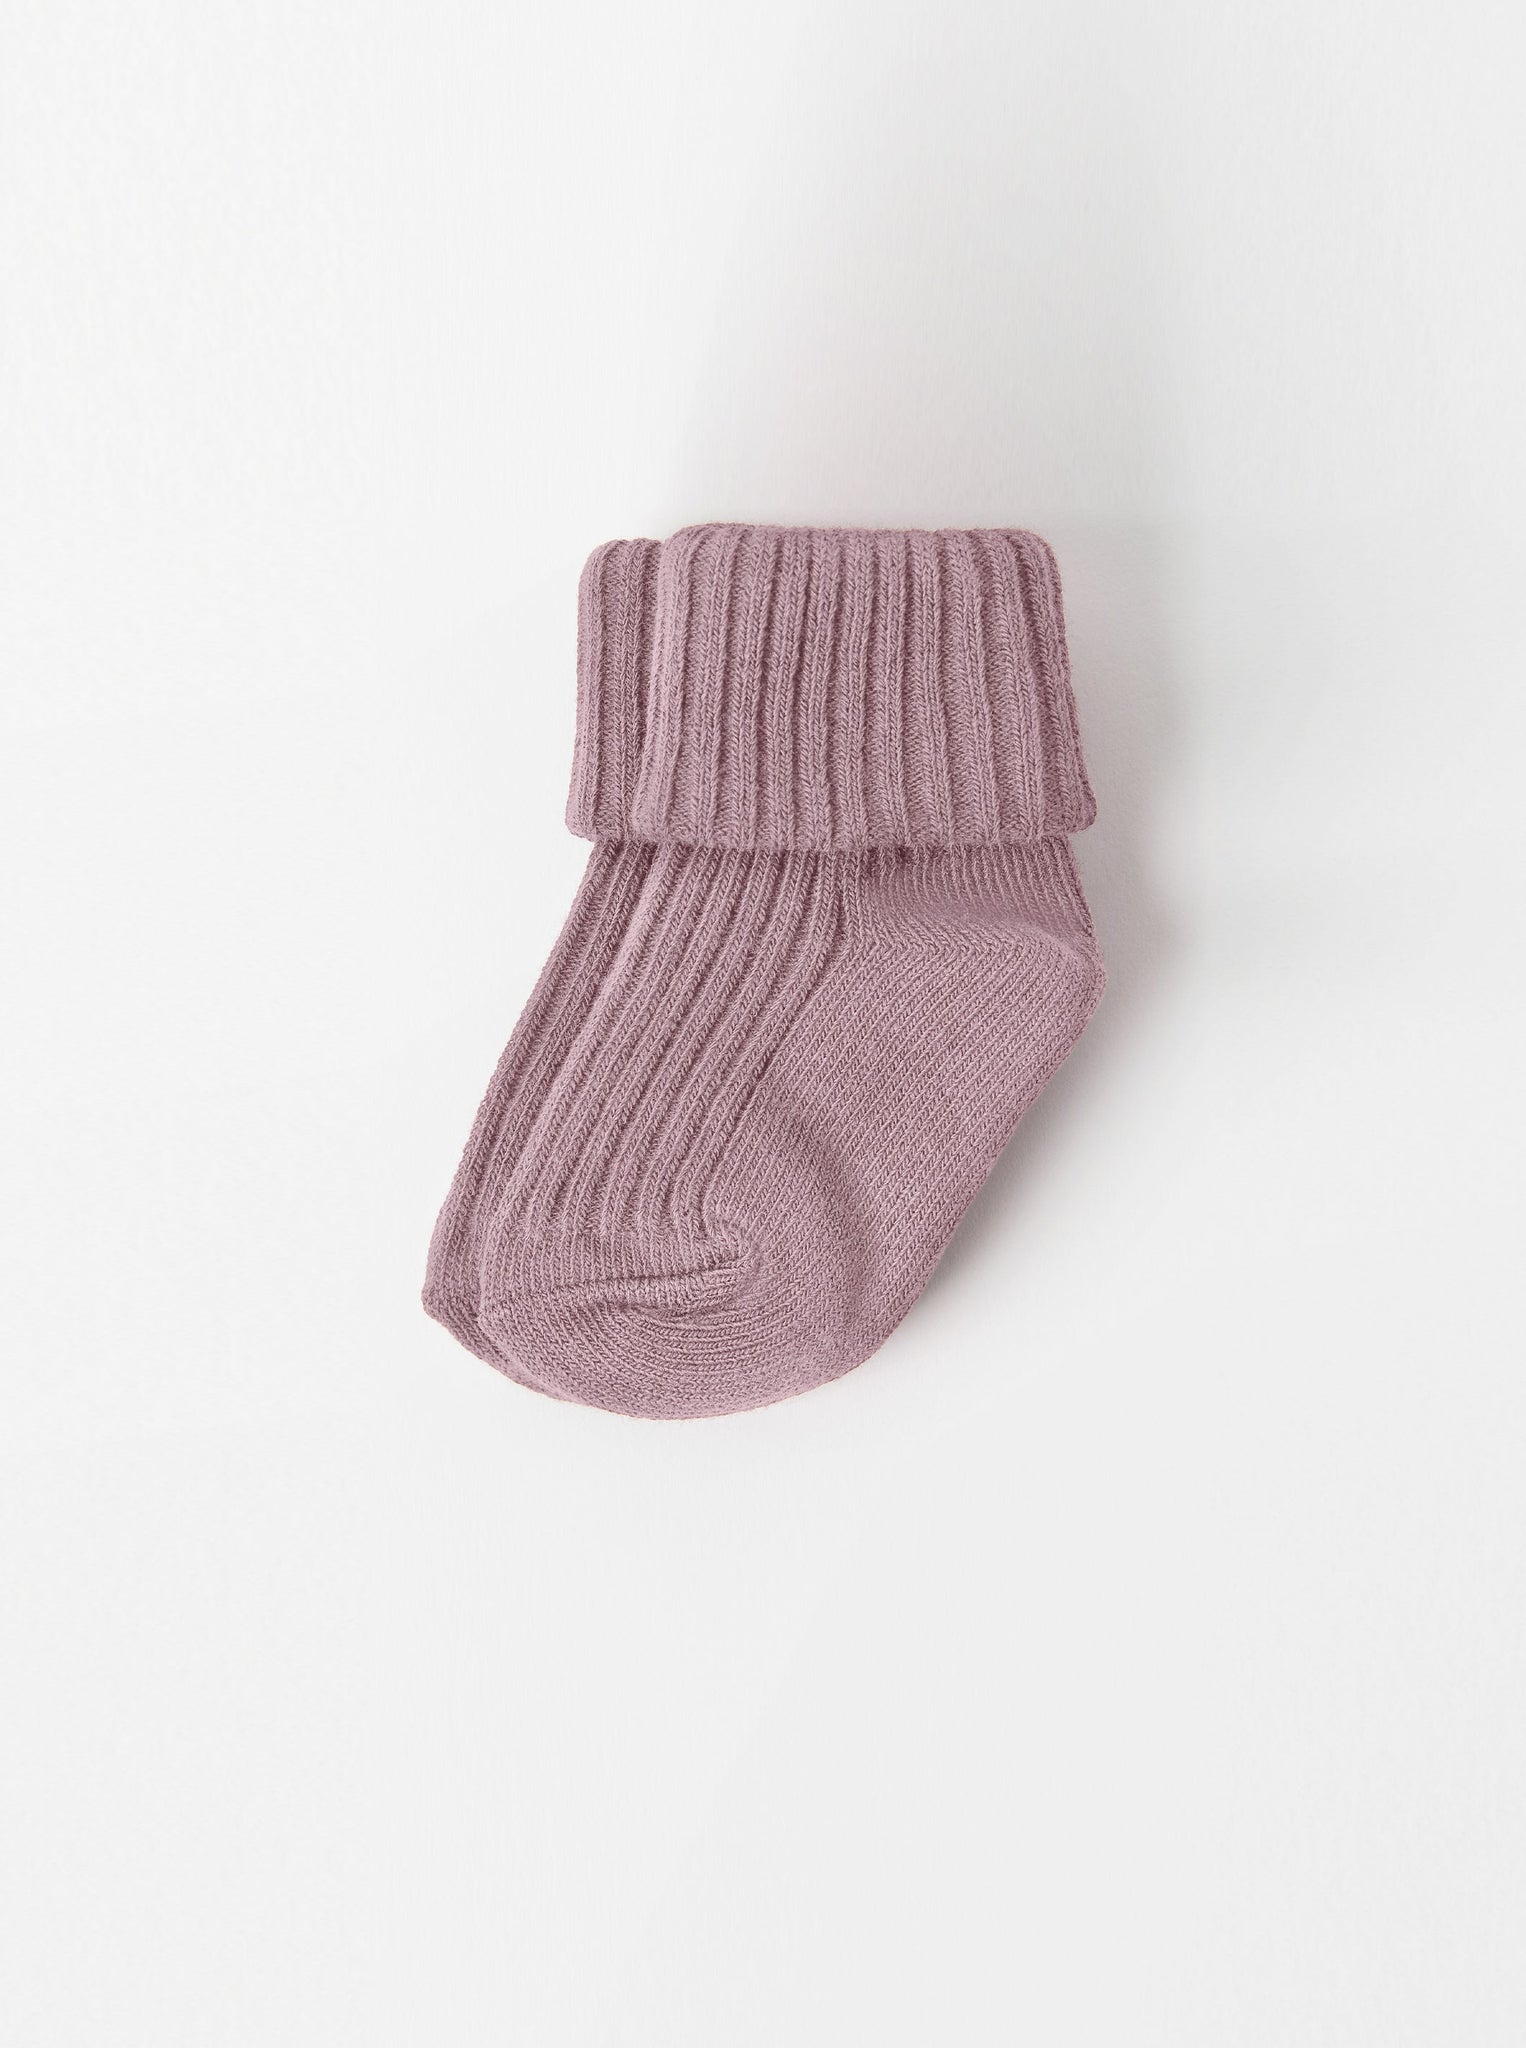 Soft Pink Baby Socks from the Polarn O. Pyret babywear collection. Nordic baby clothes made from sustainable sources.